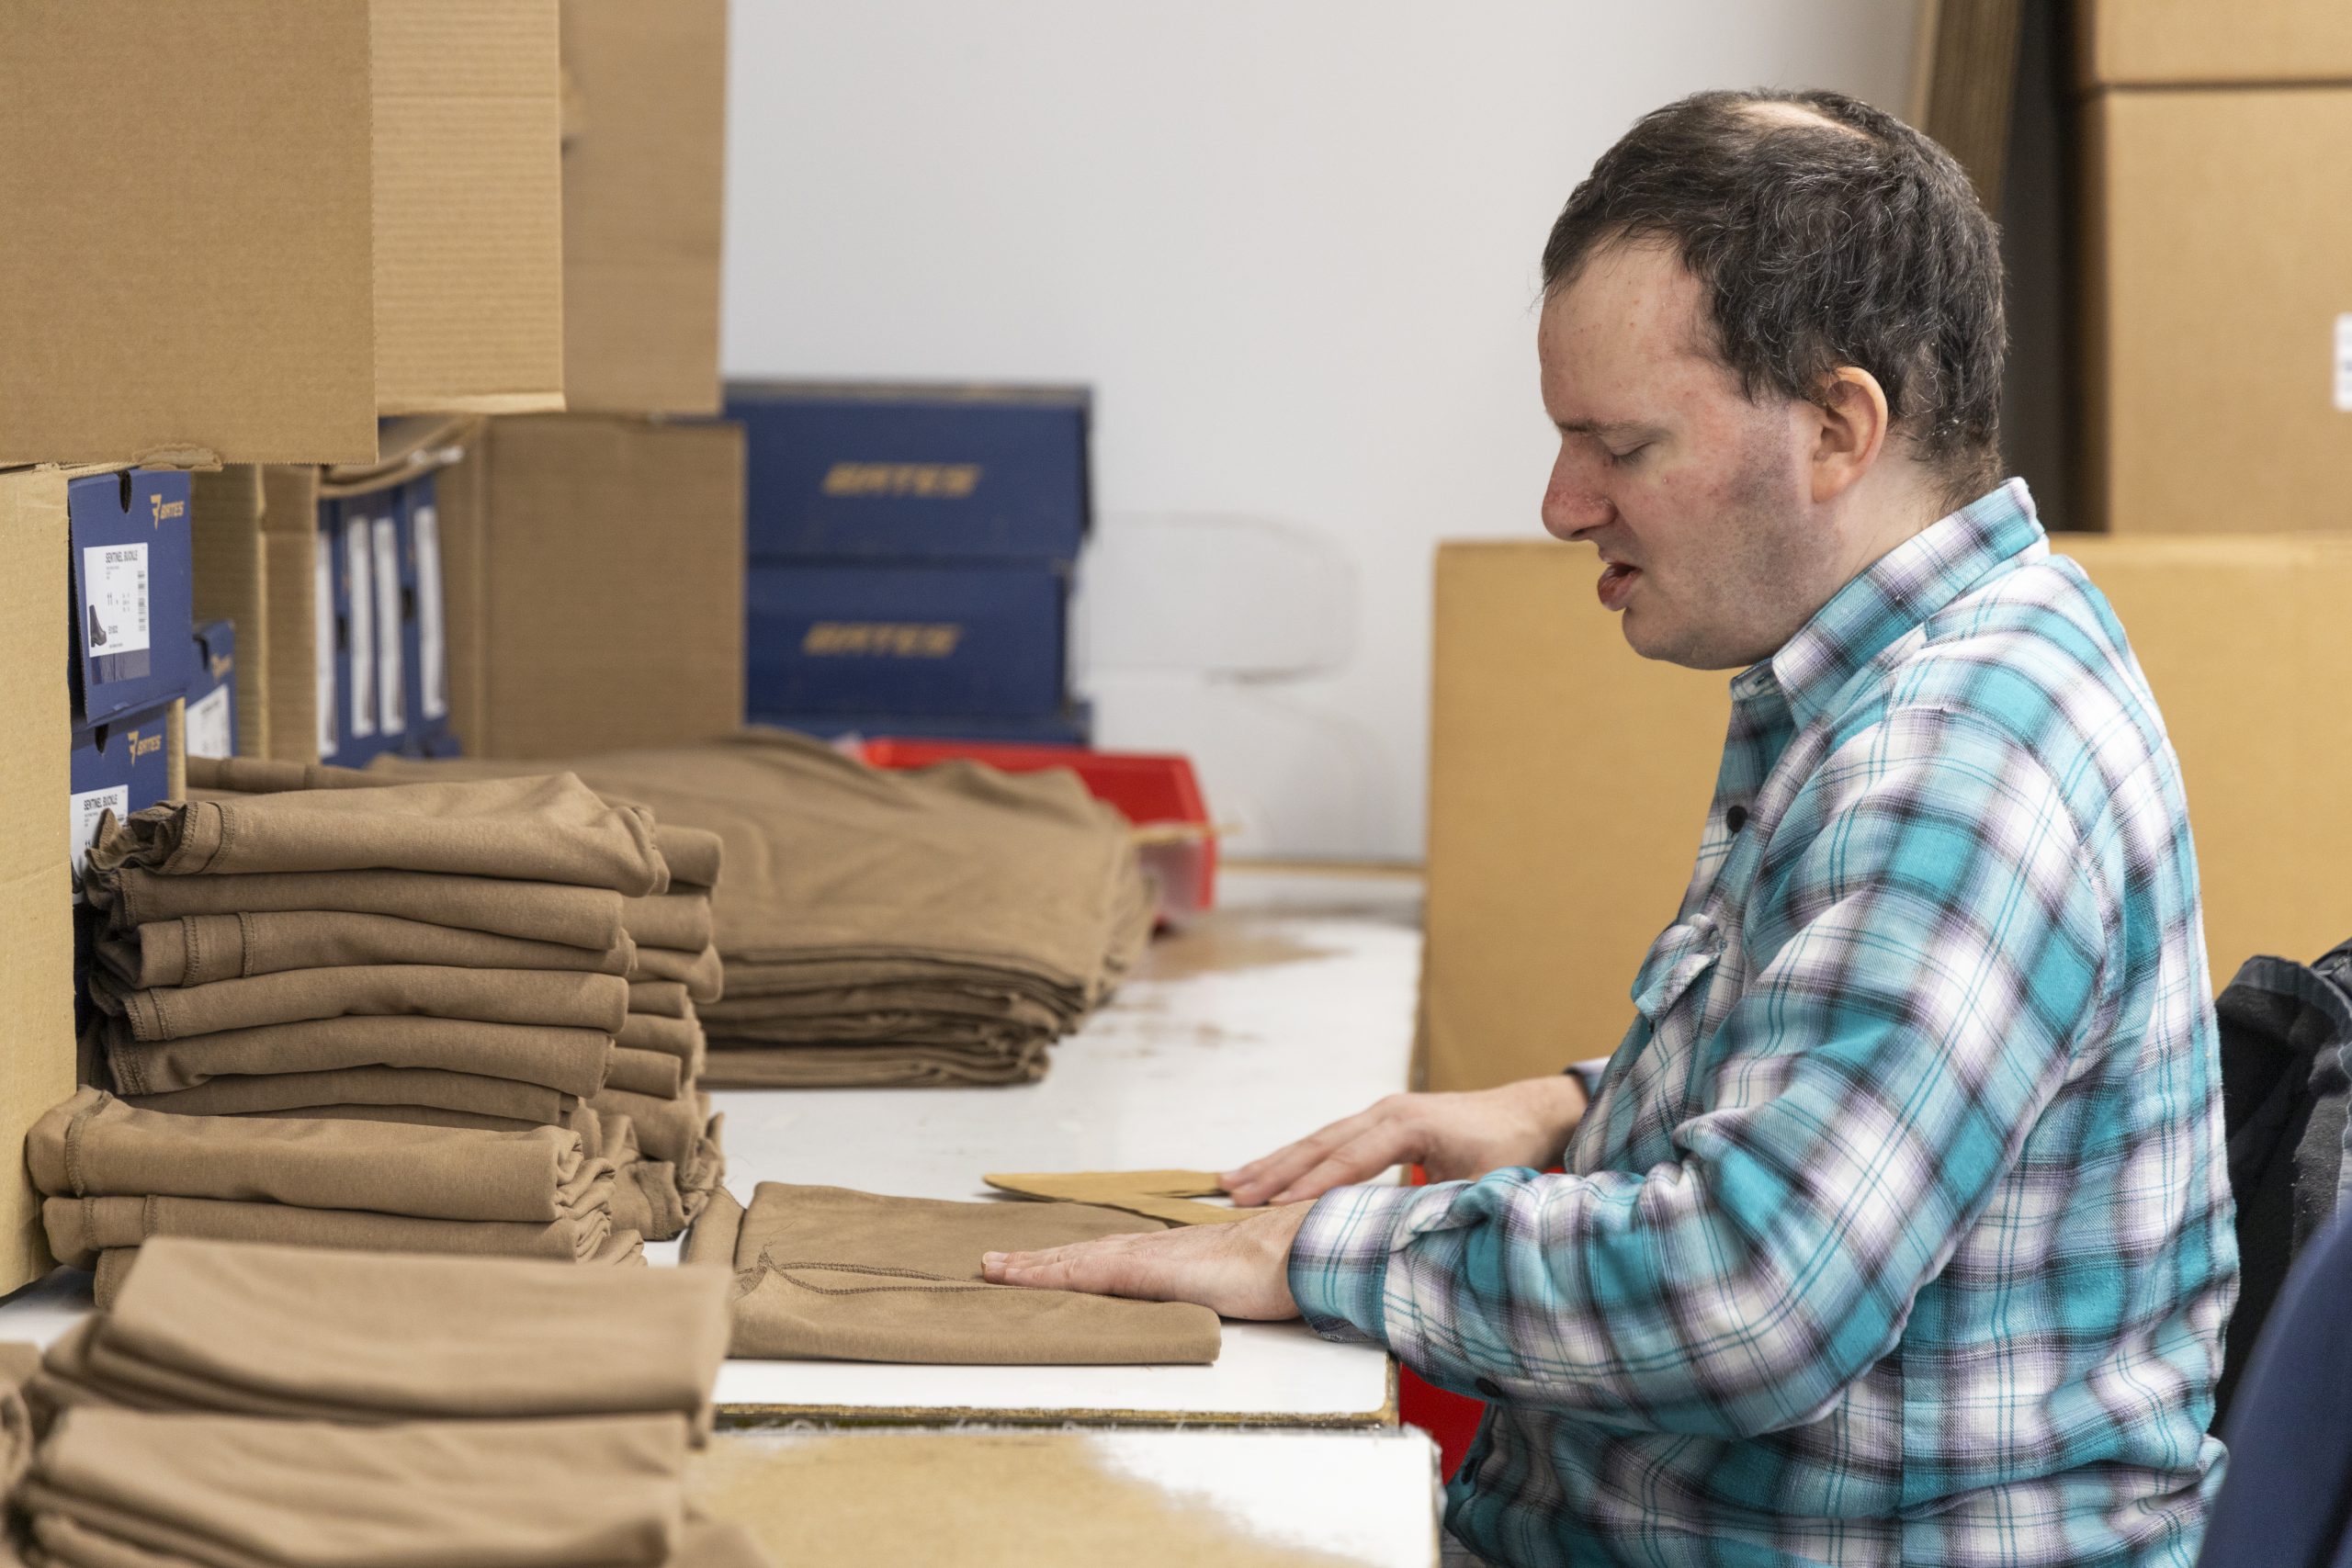 Visually impaired man works in manufacturing warehouse folding fabric